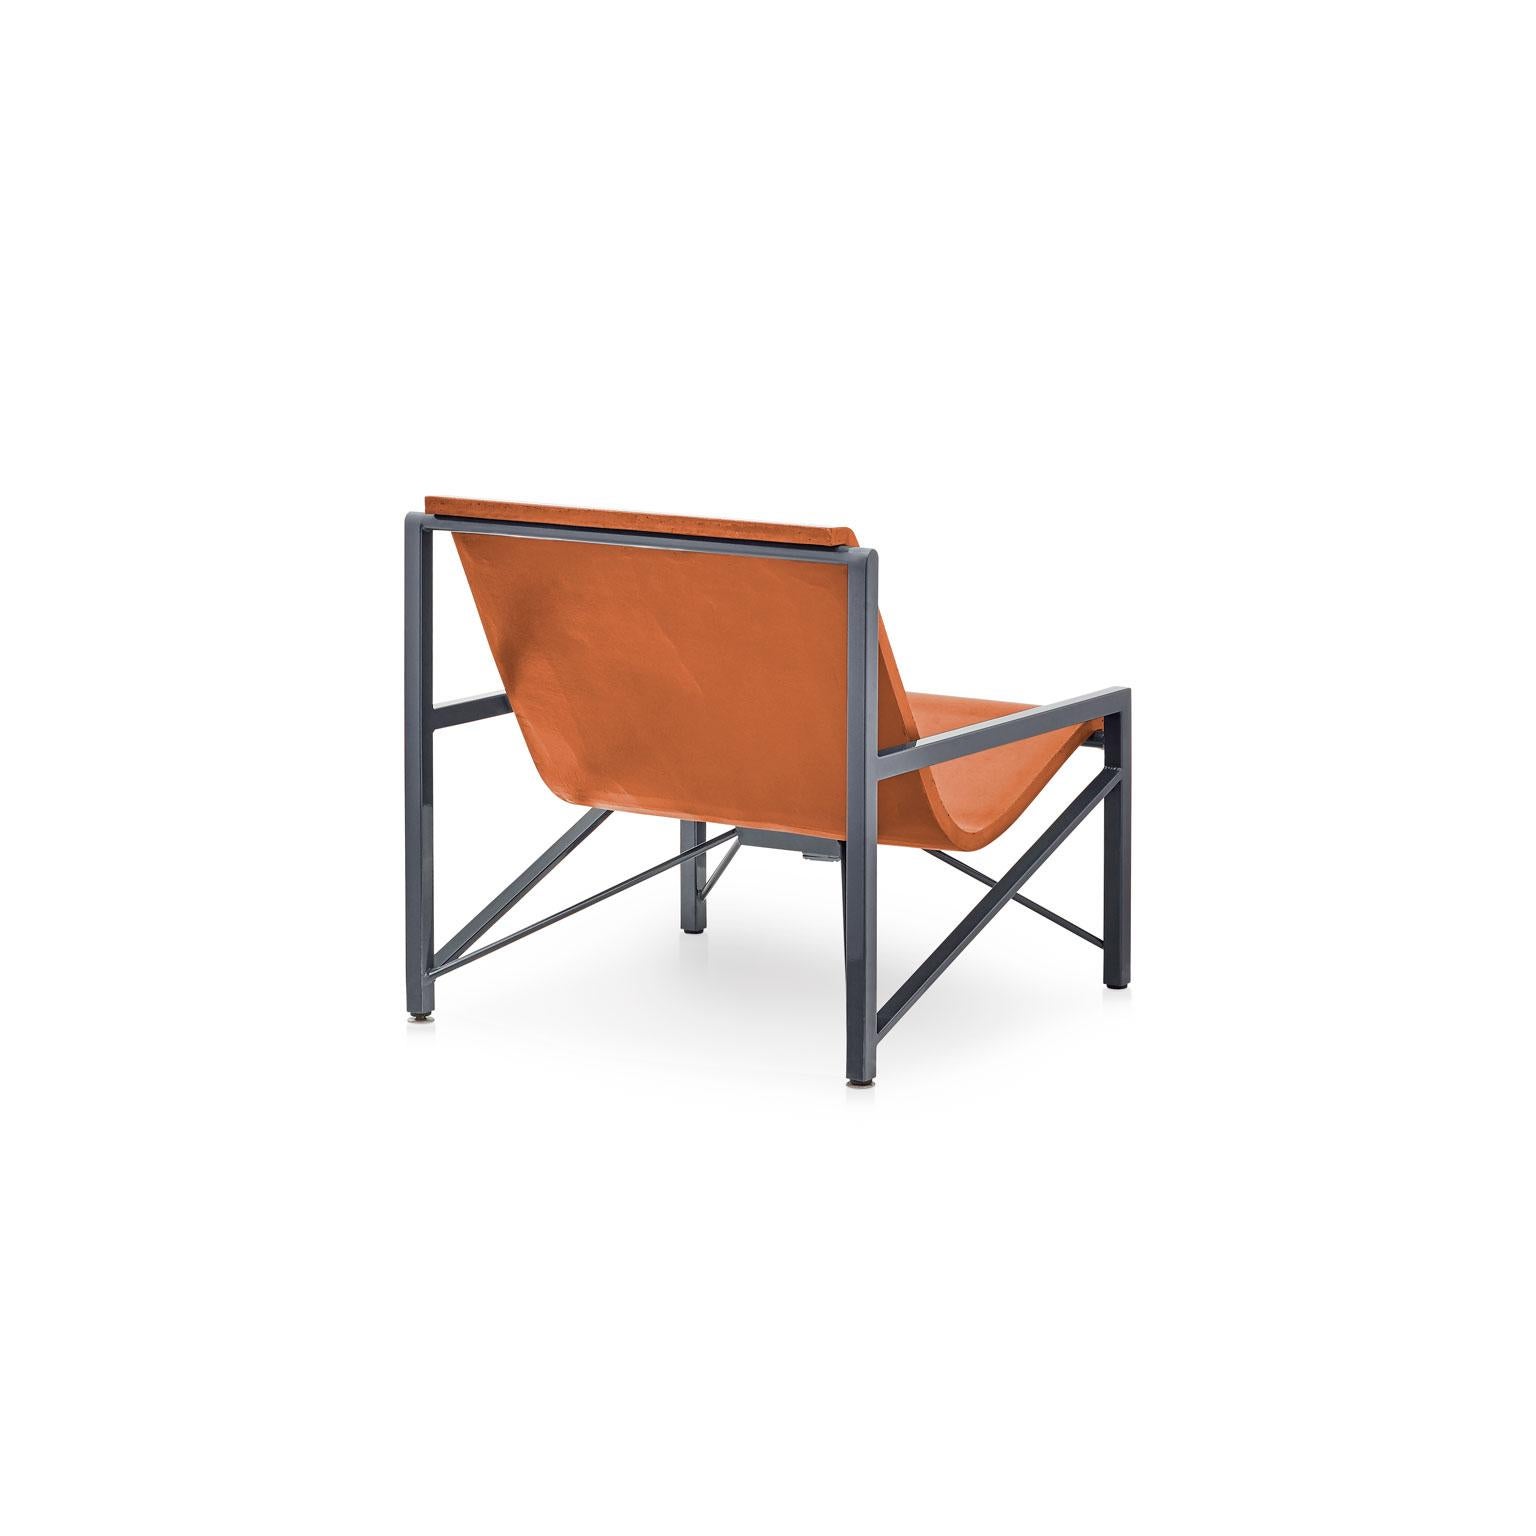 Inspired by a leather sling chair, the Evia Chair is an elegant piece of heated furniture made of cast stone and stainless steel by Galanter & Jones. Smooth like a river rock, the Helios warms your entire body with its efficient and comfortable